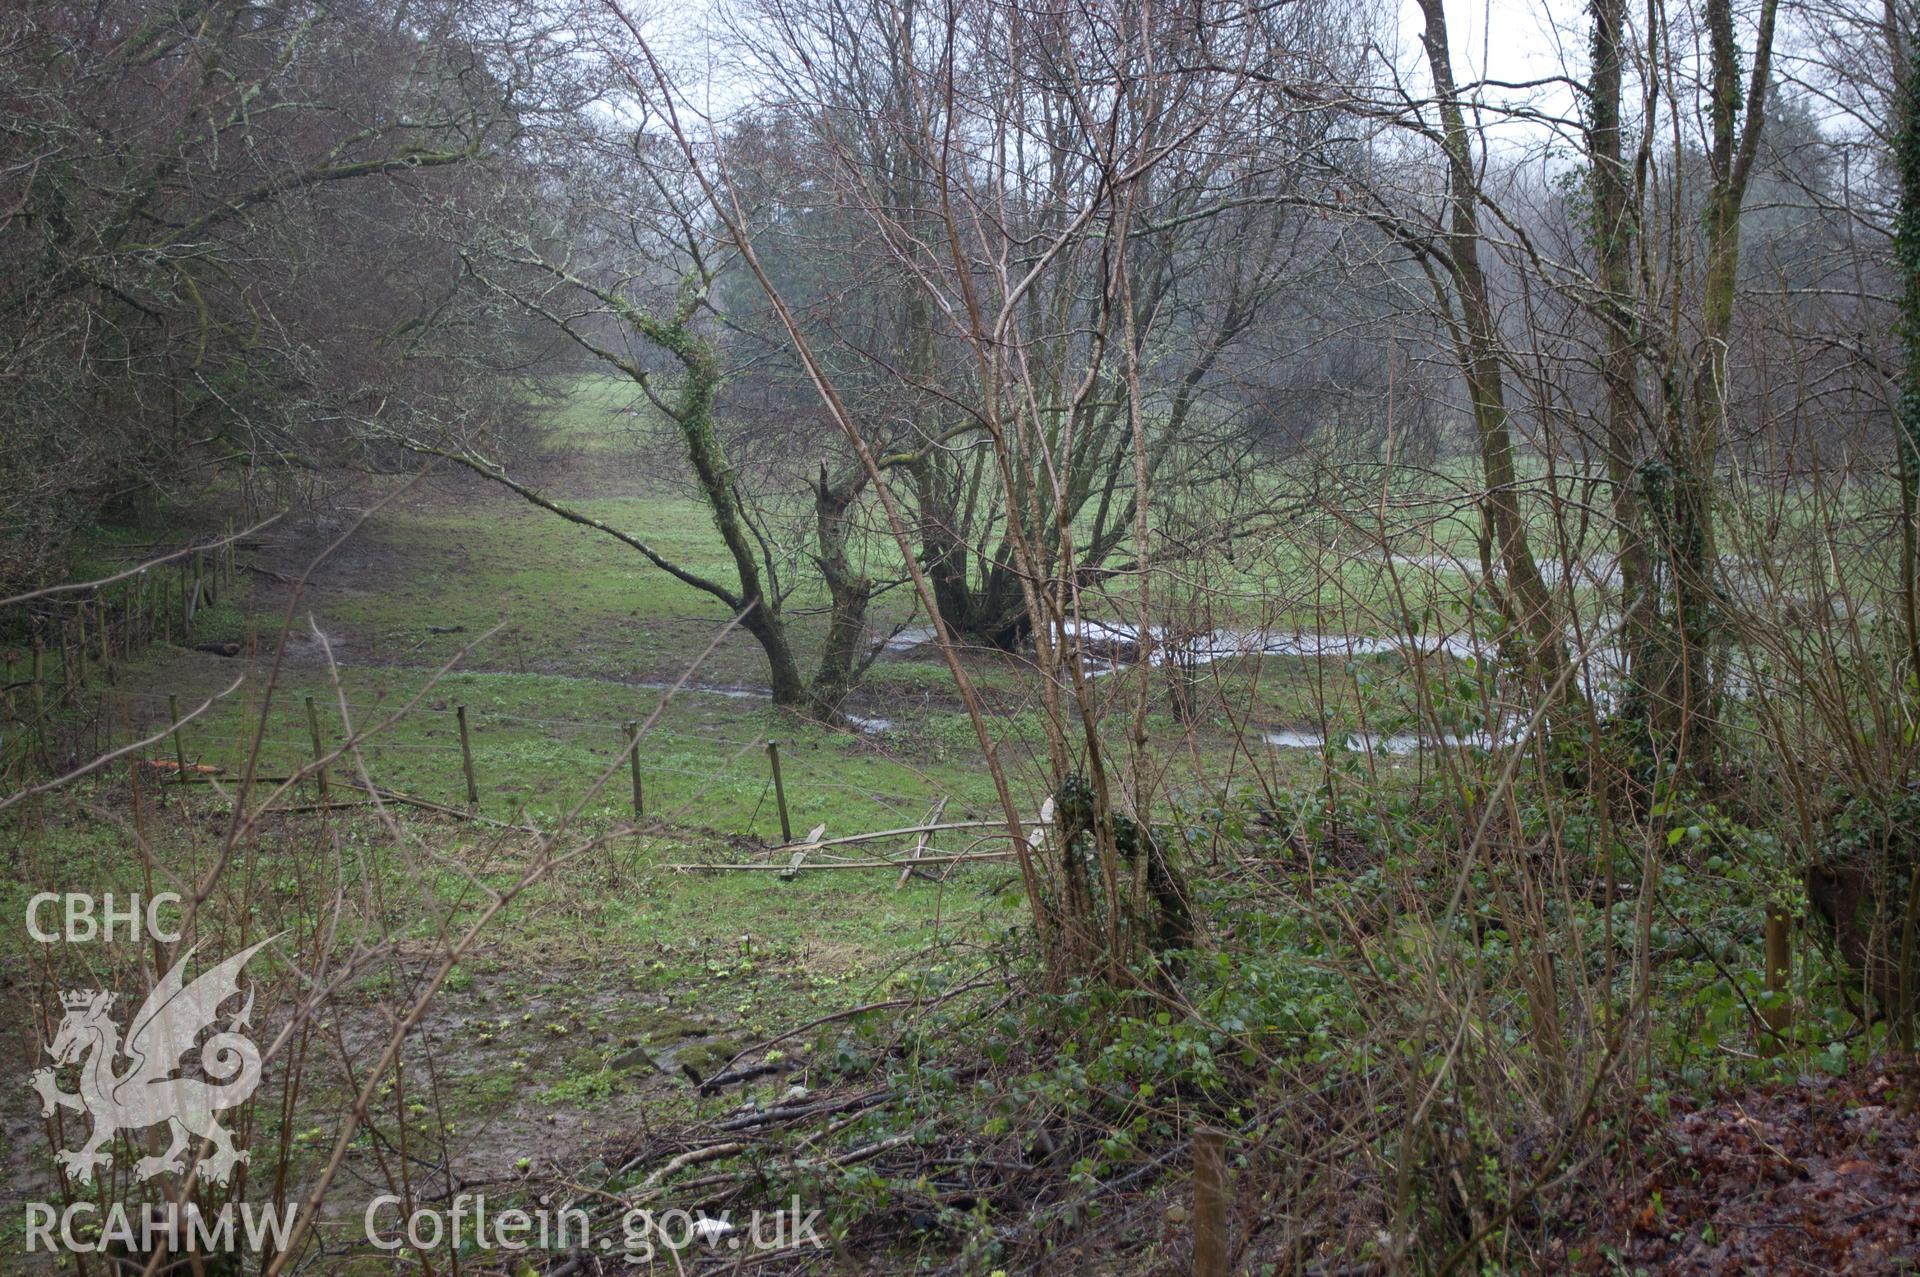 Marian Mawr archaeological assessment; section B-C, view from W showing view across low lying floodplain field showing pipe route, taken by Robert Evans of Gwynedd Archaeological Trust, 5th February 2016.